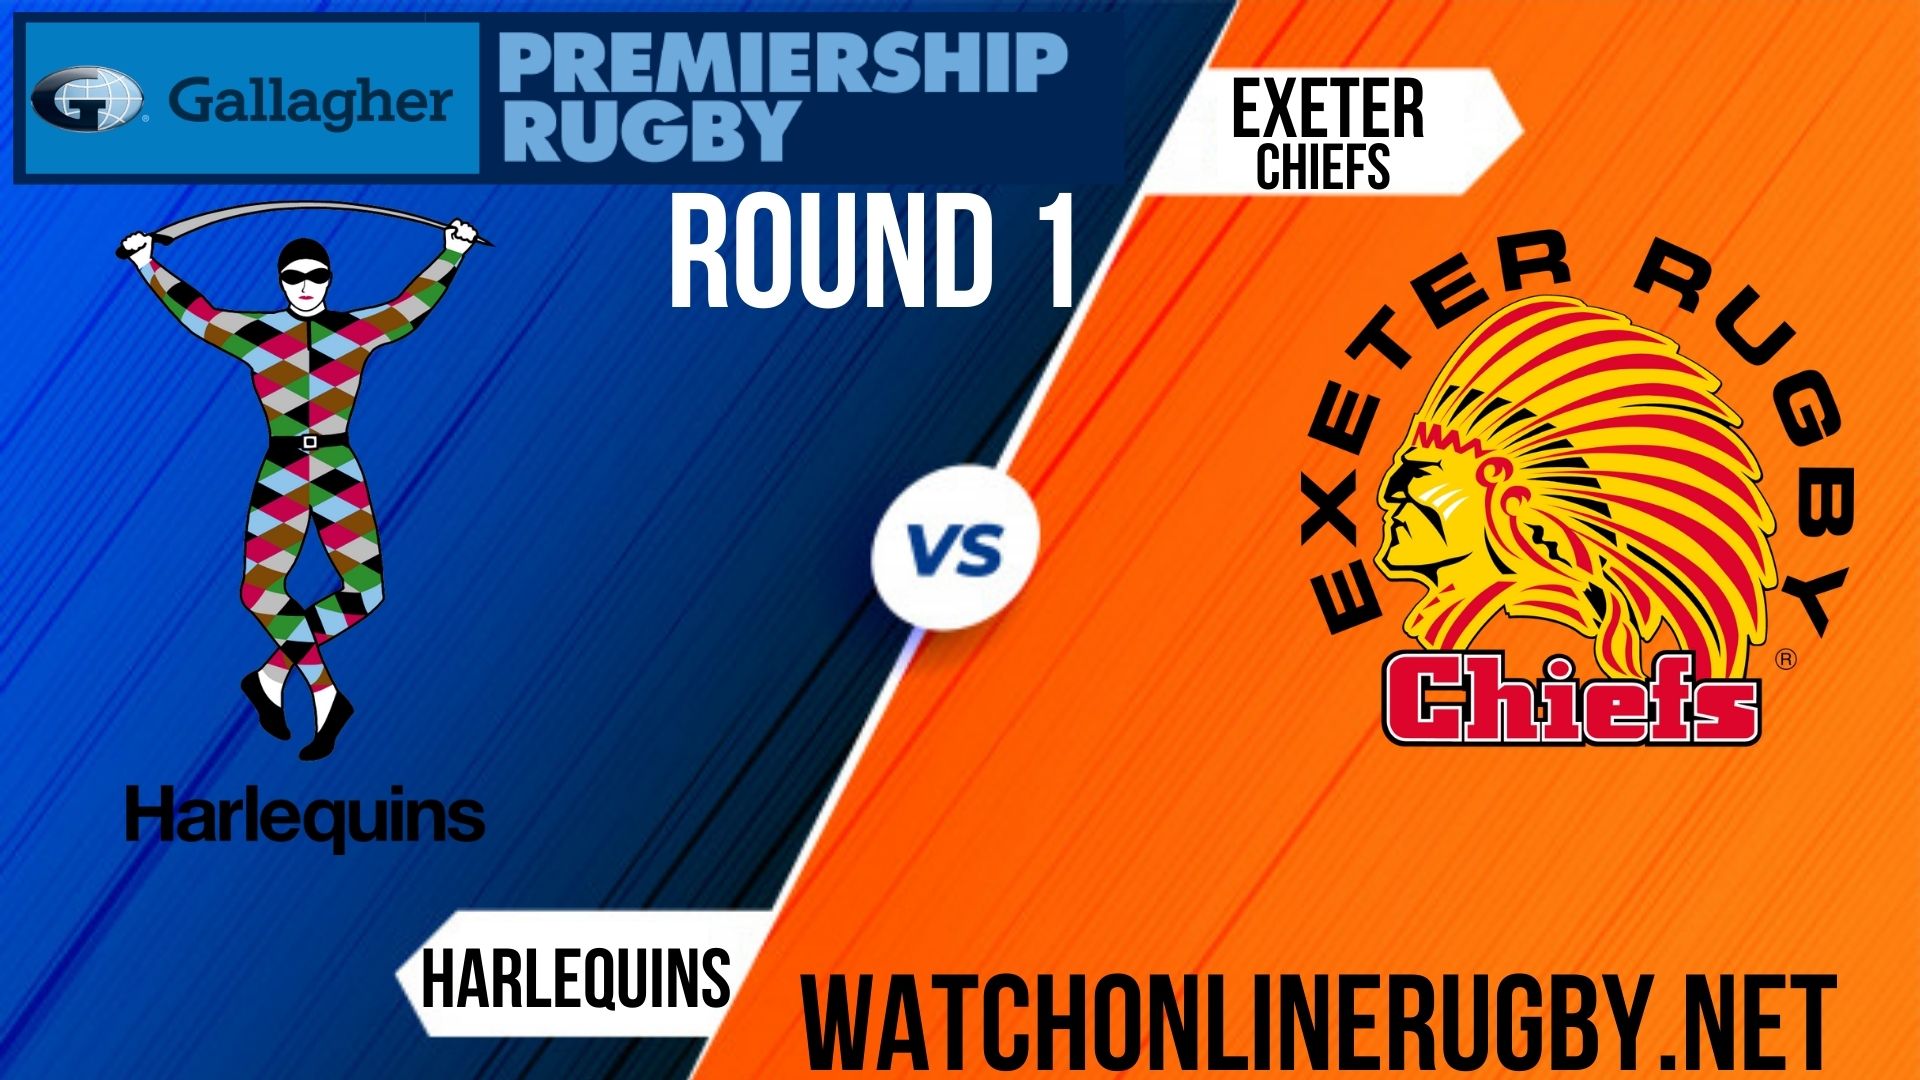 Harlequins vs Exeter Chiefs Premiership Rugby 2020 RD 1